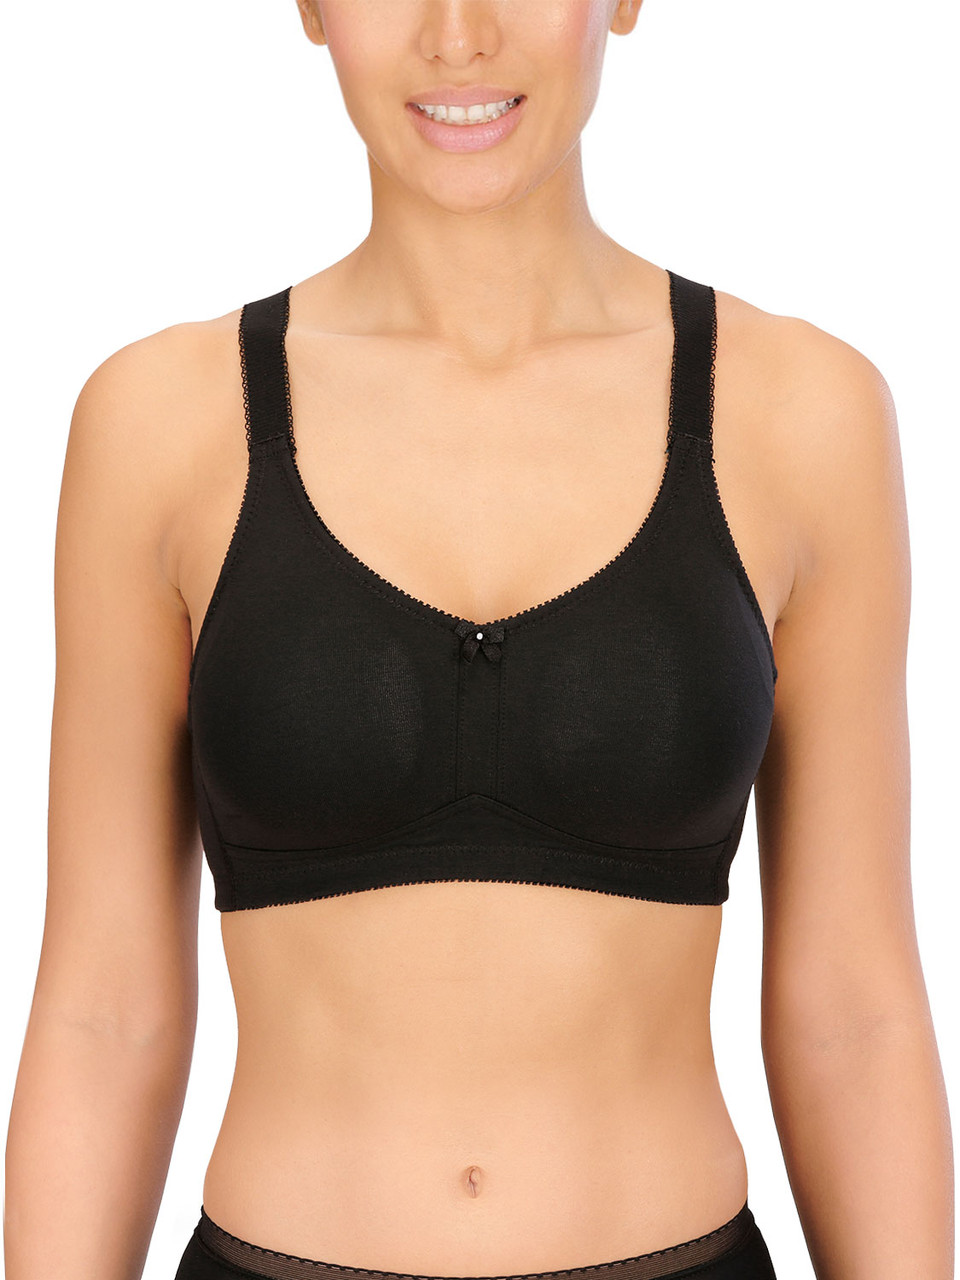 Leading Lady Post Mastectomy Soft Cup Bra & Reviews